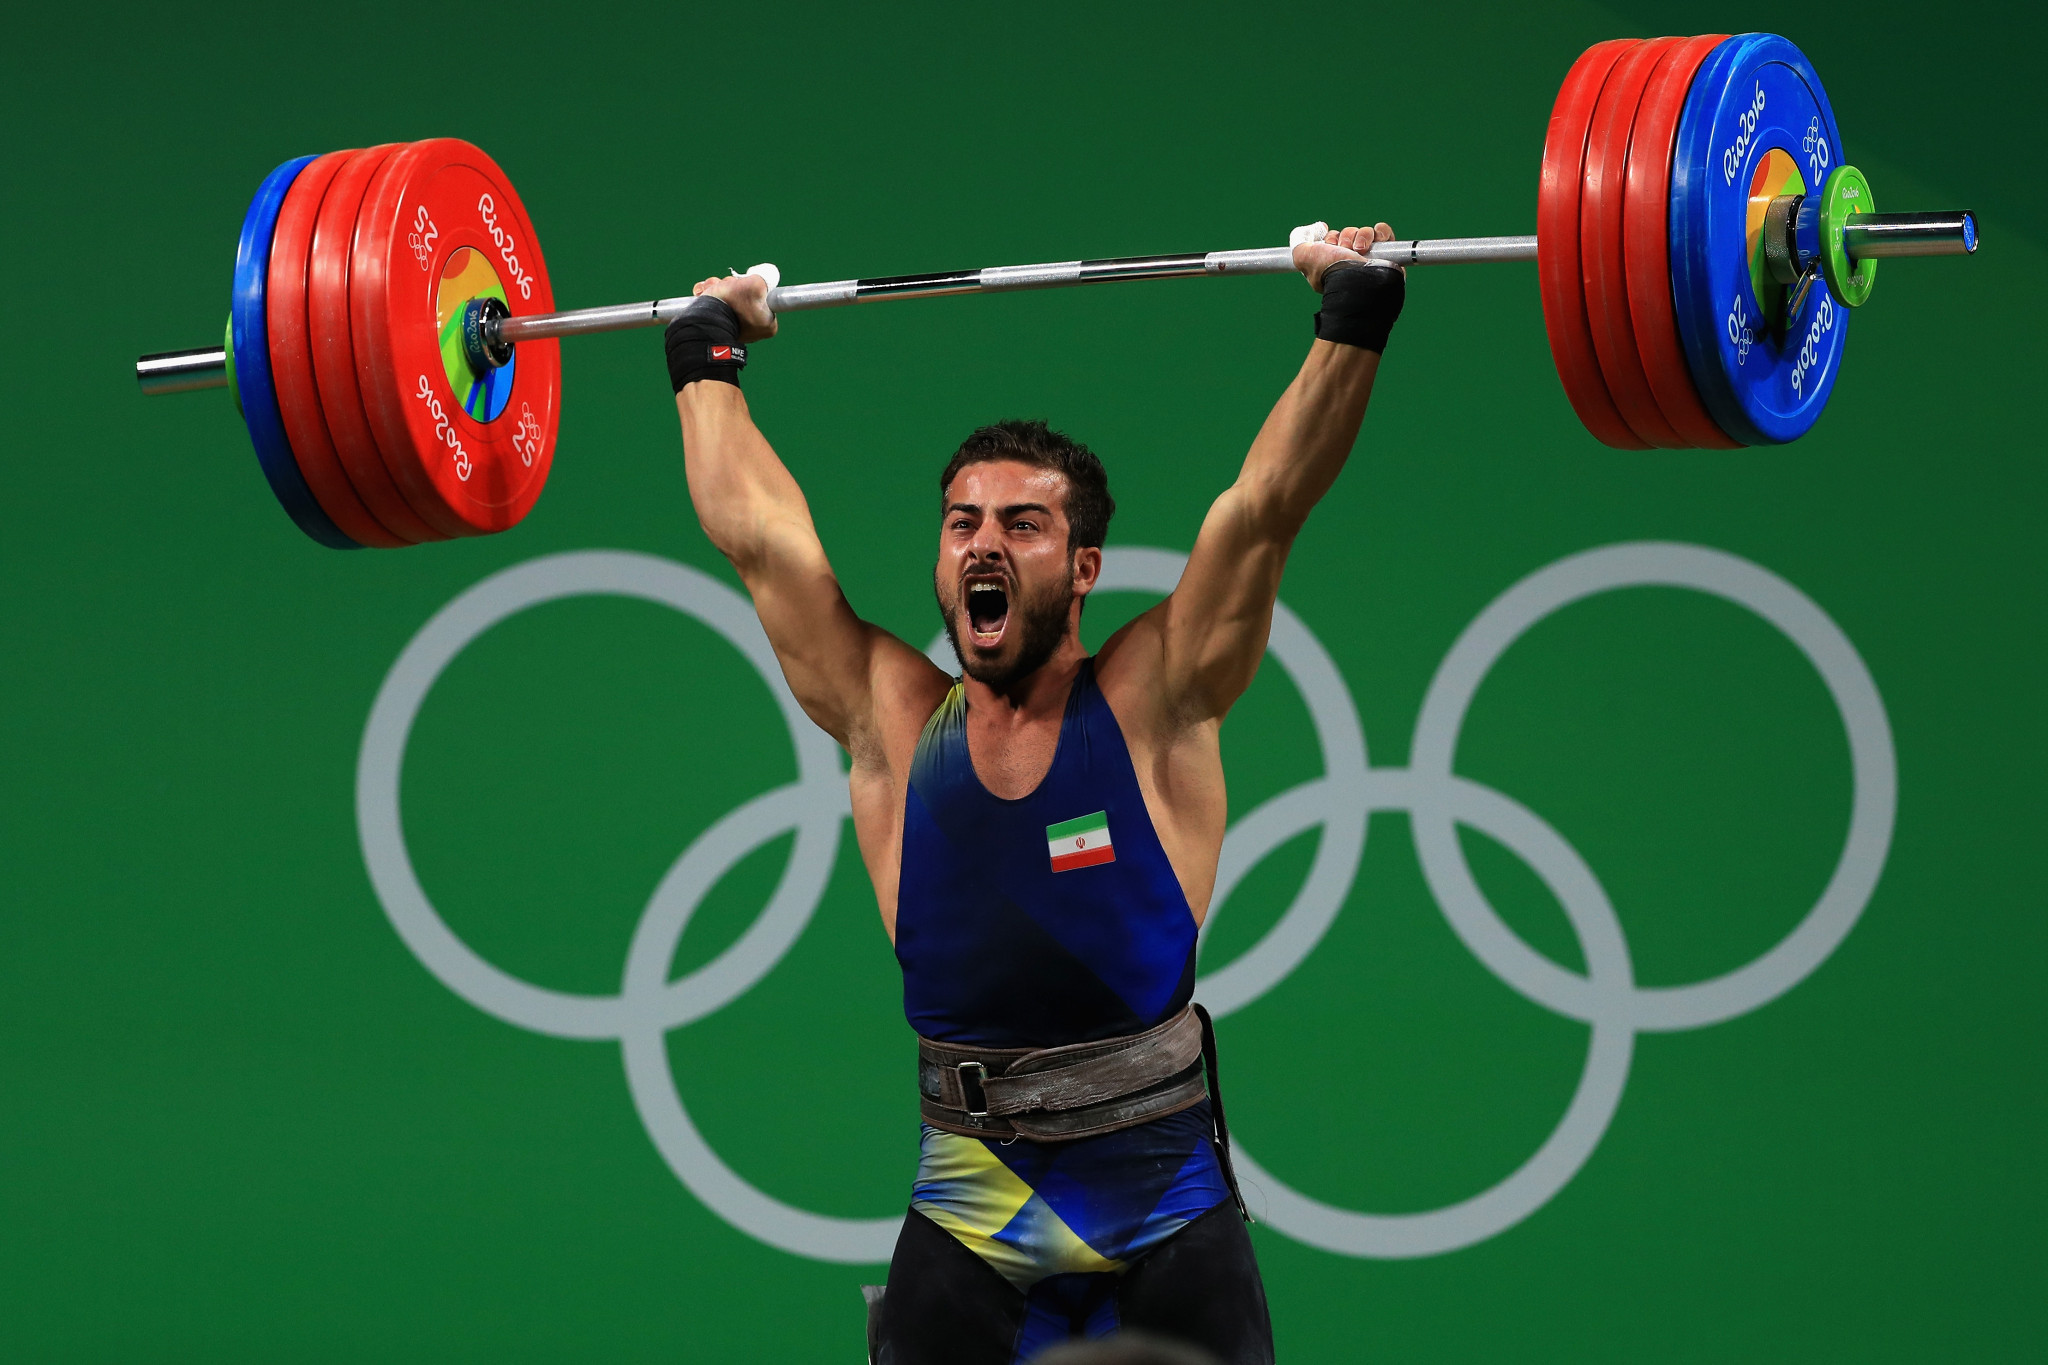 There were 260 weightlifting quota places at Rio 2016 when Kianoush Rostami won gold, and the Iranian is due to compete at Paris 2024, where there are 120 places ©Getty Images